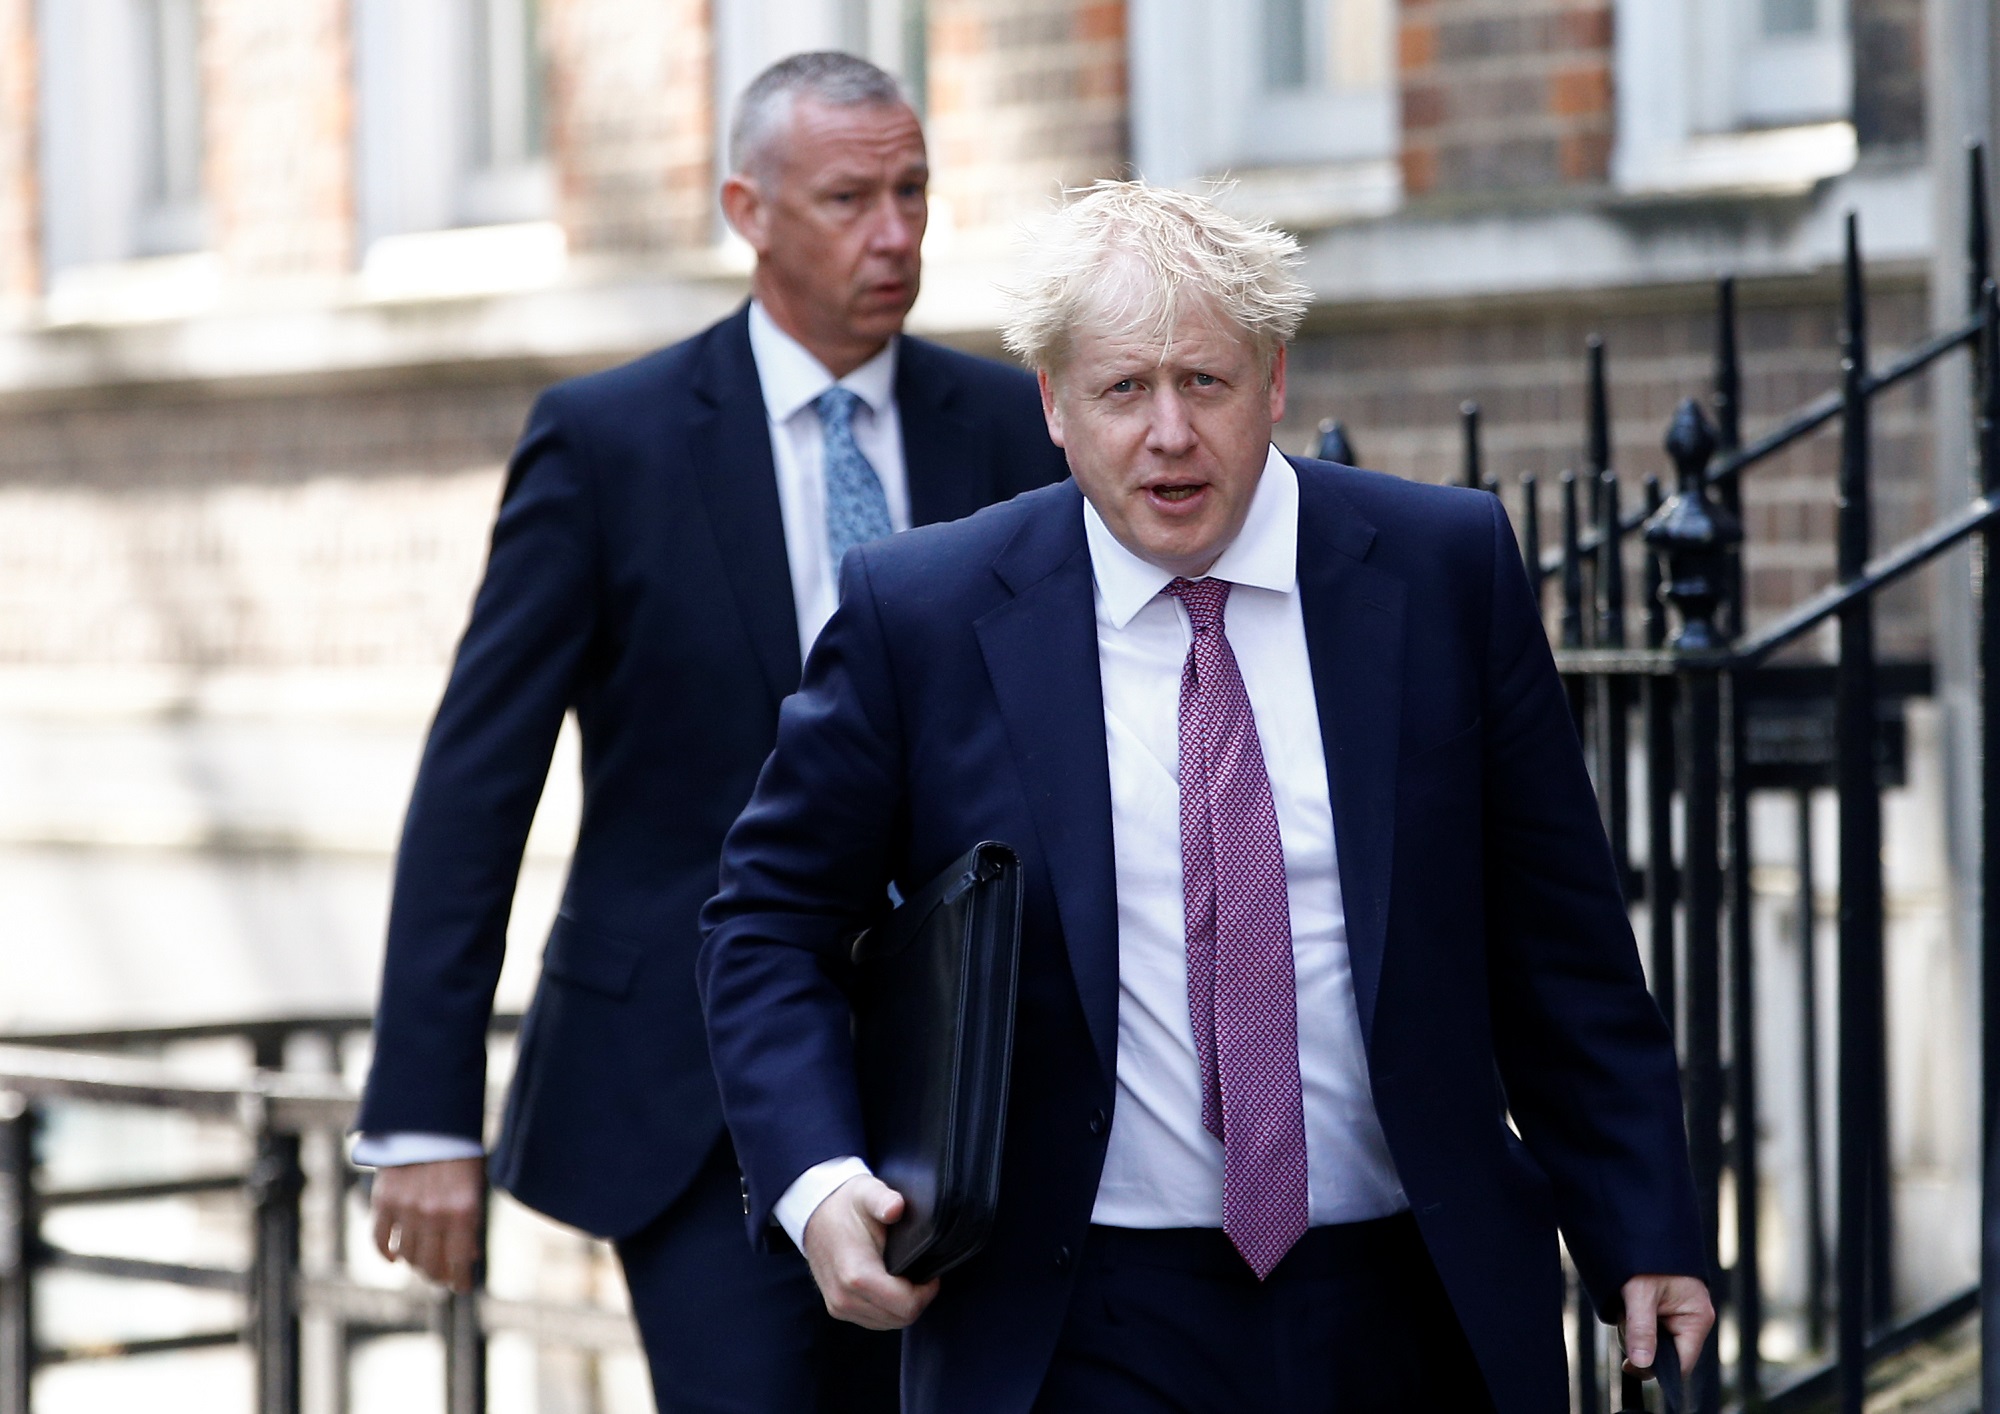 Conservative Party leadership candidate Boris Johnson arrives near the Houses of Parliament in London, Britain July 22, 2019. REUTERS/Henry Nicholls